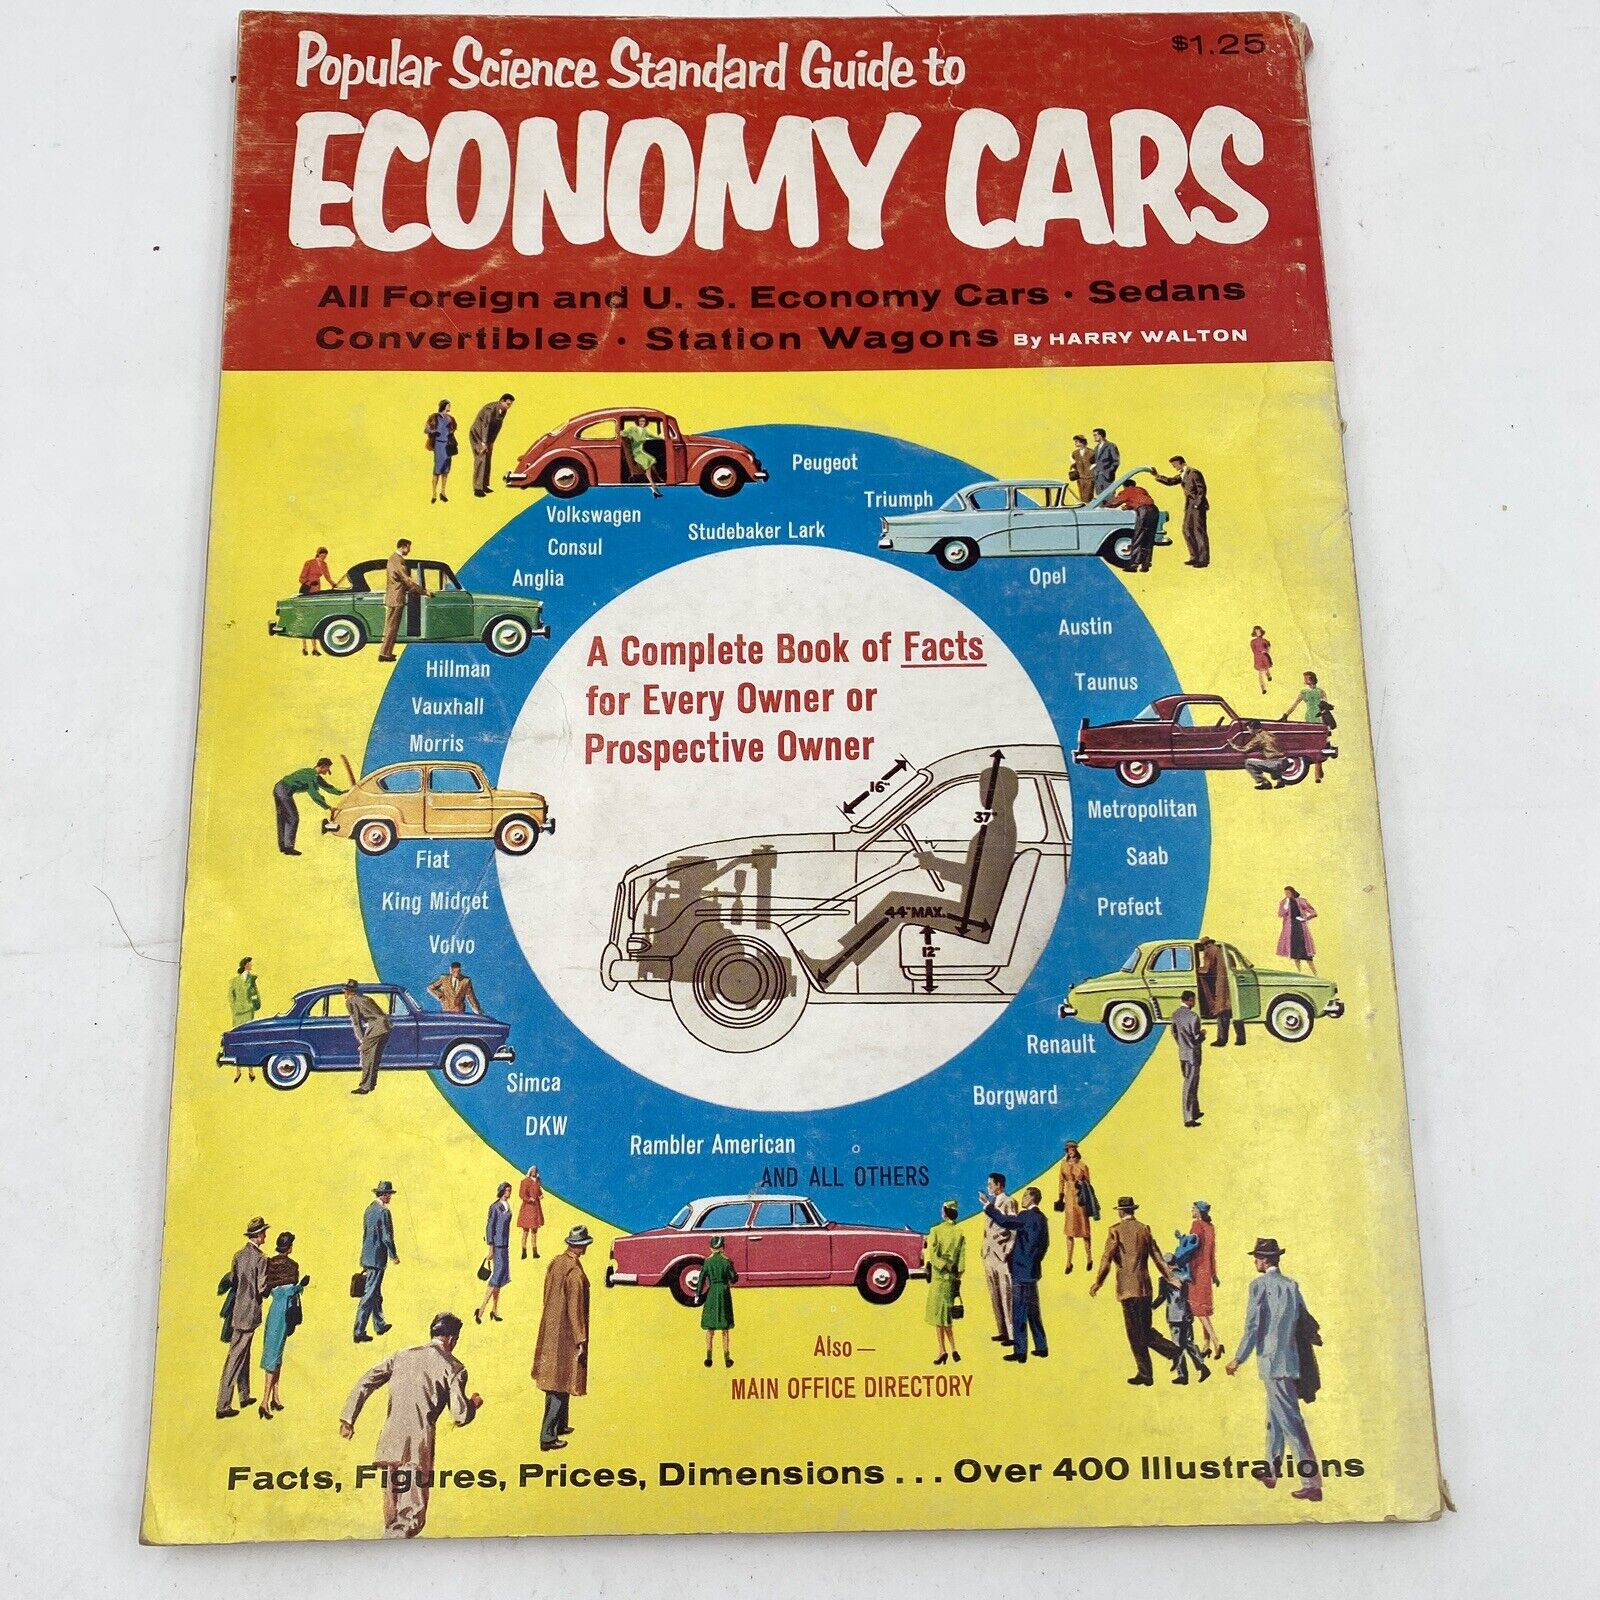 Vintage 1959 Popular Science Standard Guide to Economy Cars, Cool old car guide